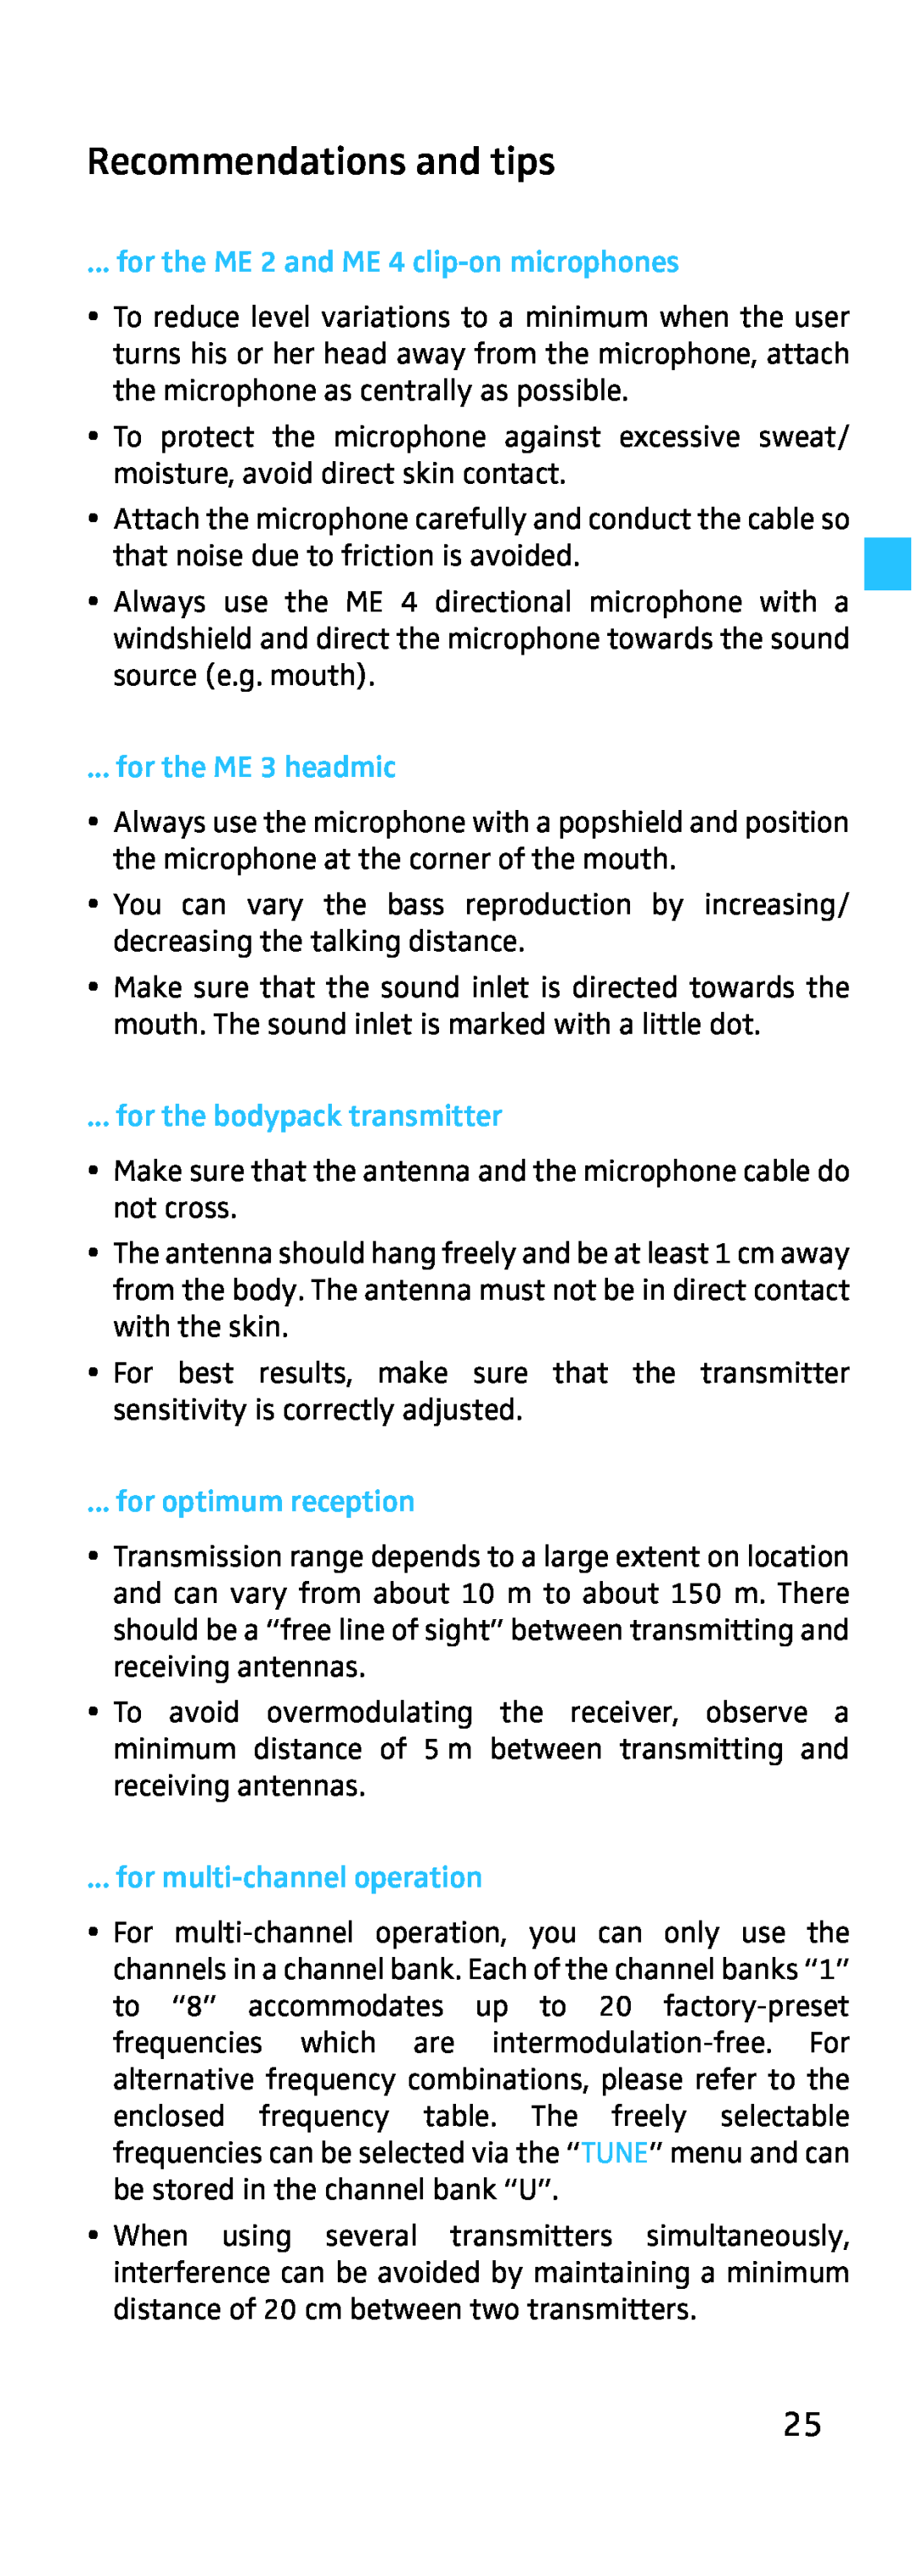 Sennheiser EK 500, SK 500 manual Recommendations and tips, for the ME 2 and ME 4 clip-onmicrophones, for the ME 3 headmic 